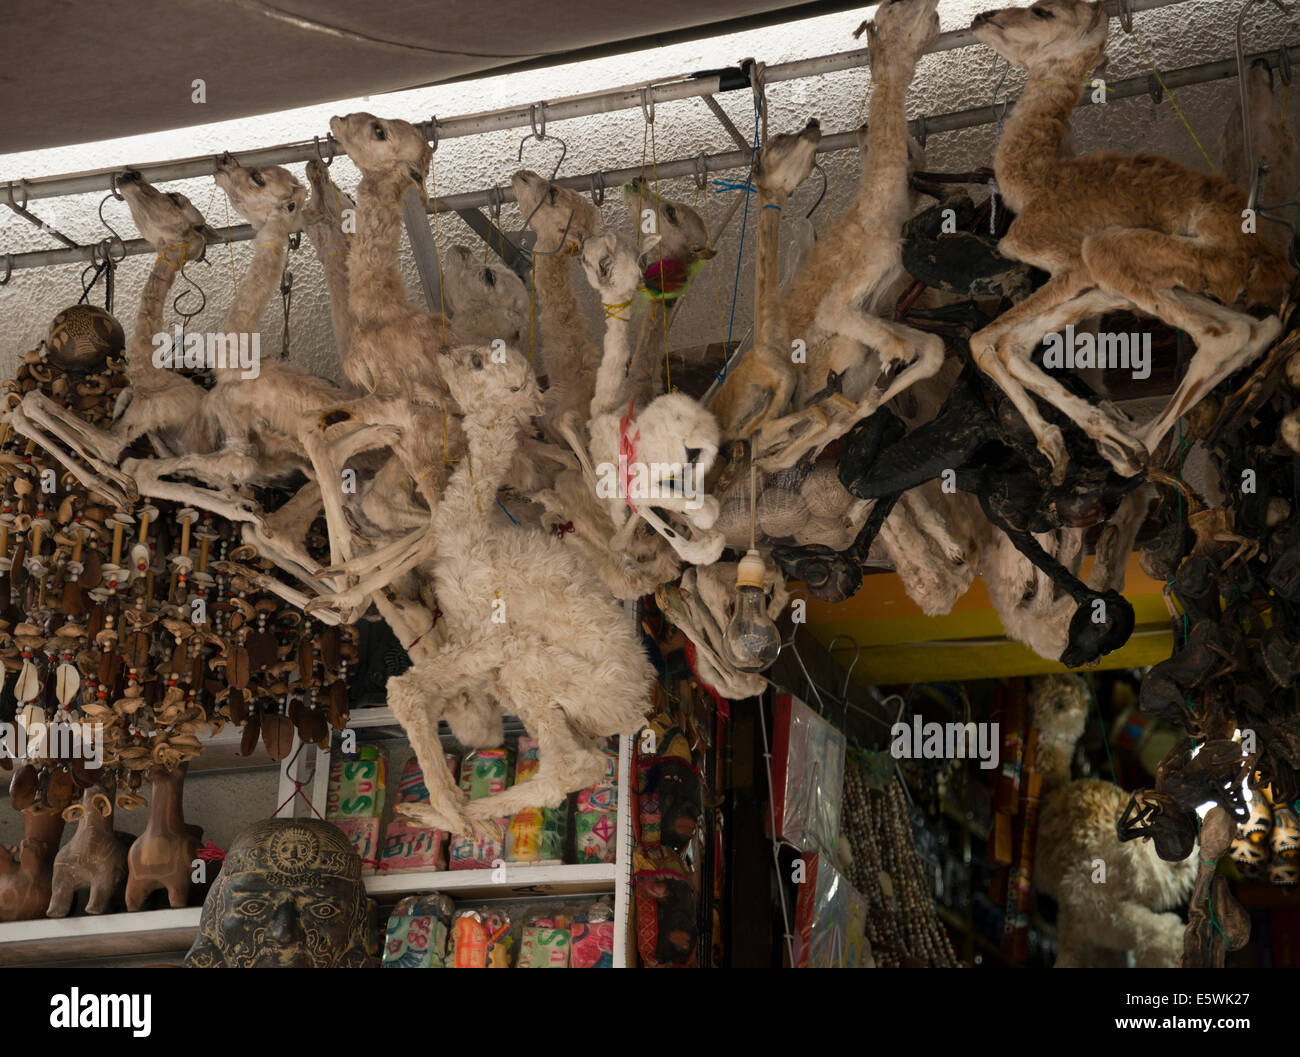 Dead dessicated Llama foetuses for sale at a street stall at the Witches market, La Paz, Bolivia. Stock Photo